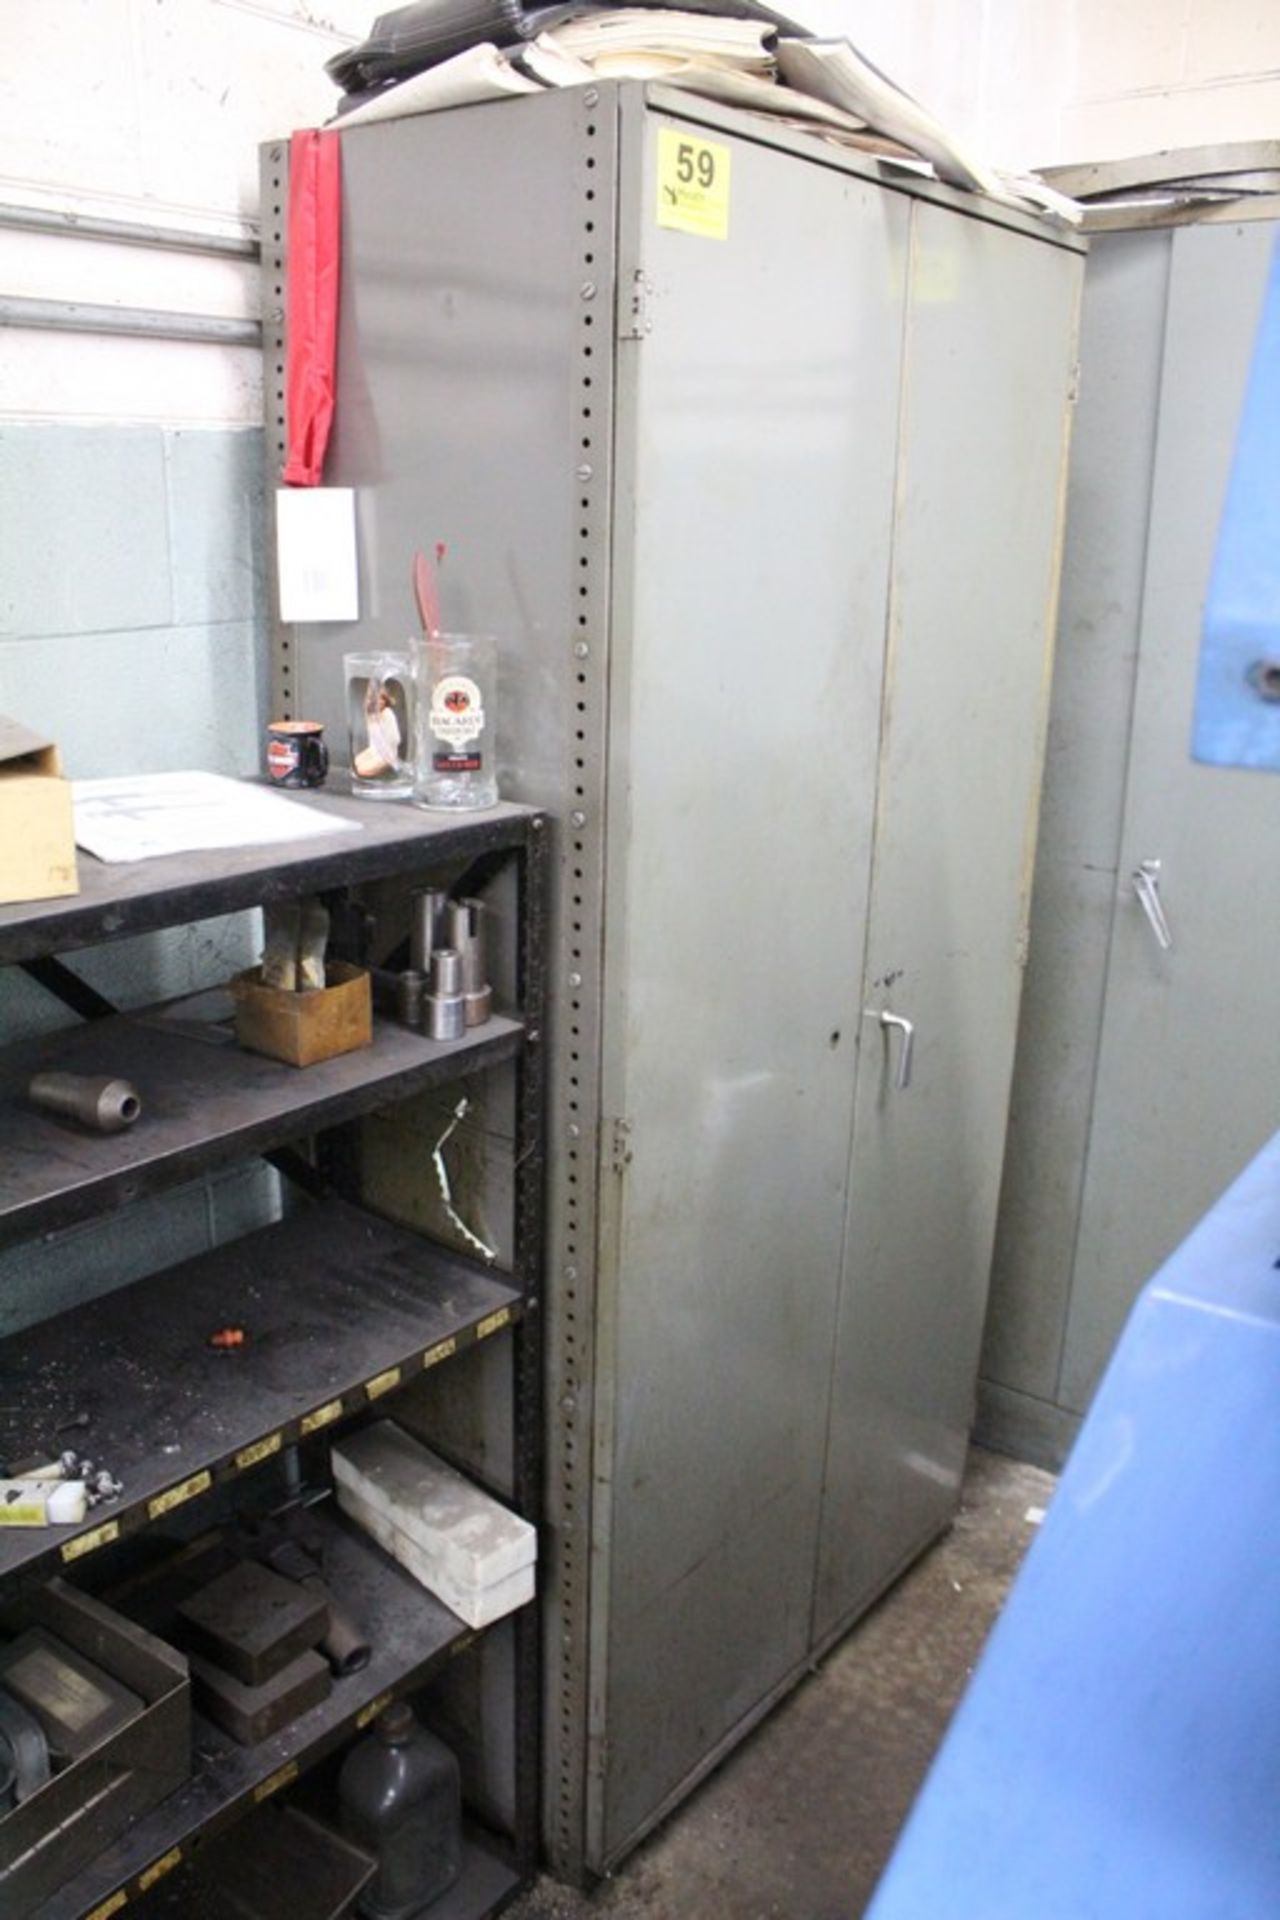 36" X 19" X 75" TWO DOOR STEEL STORAGE CABINET WITH CONTENTS: ELECTRICAL FITTINGS, BUSHINGS,